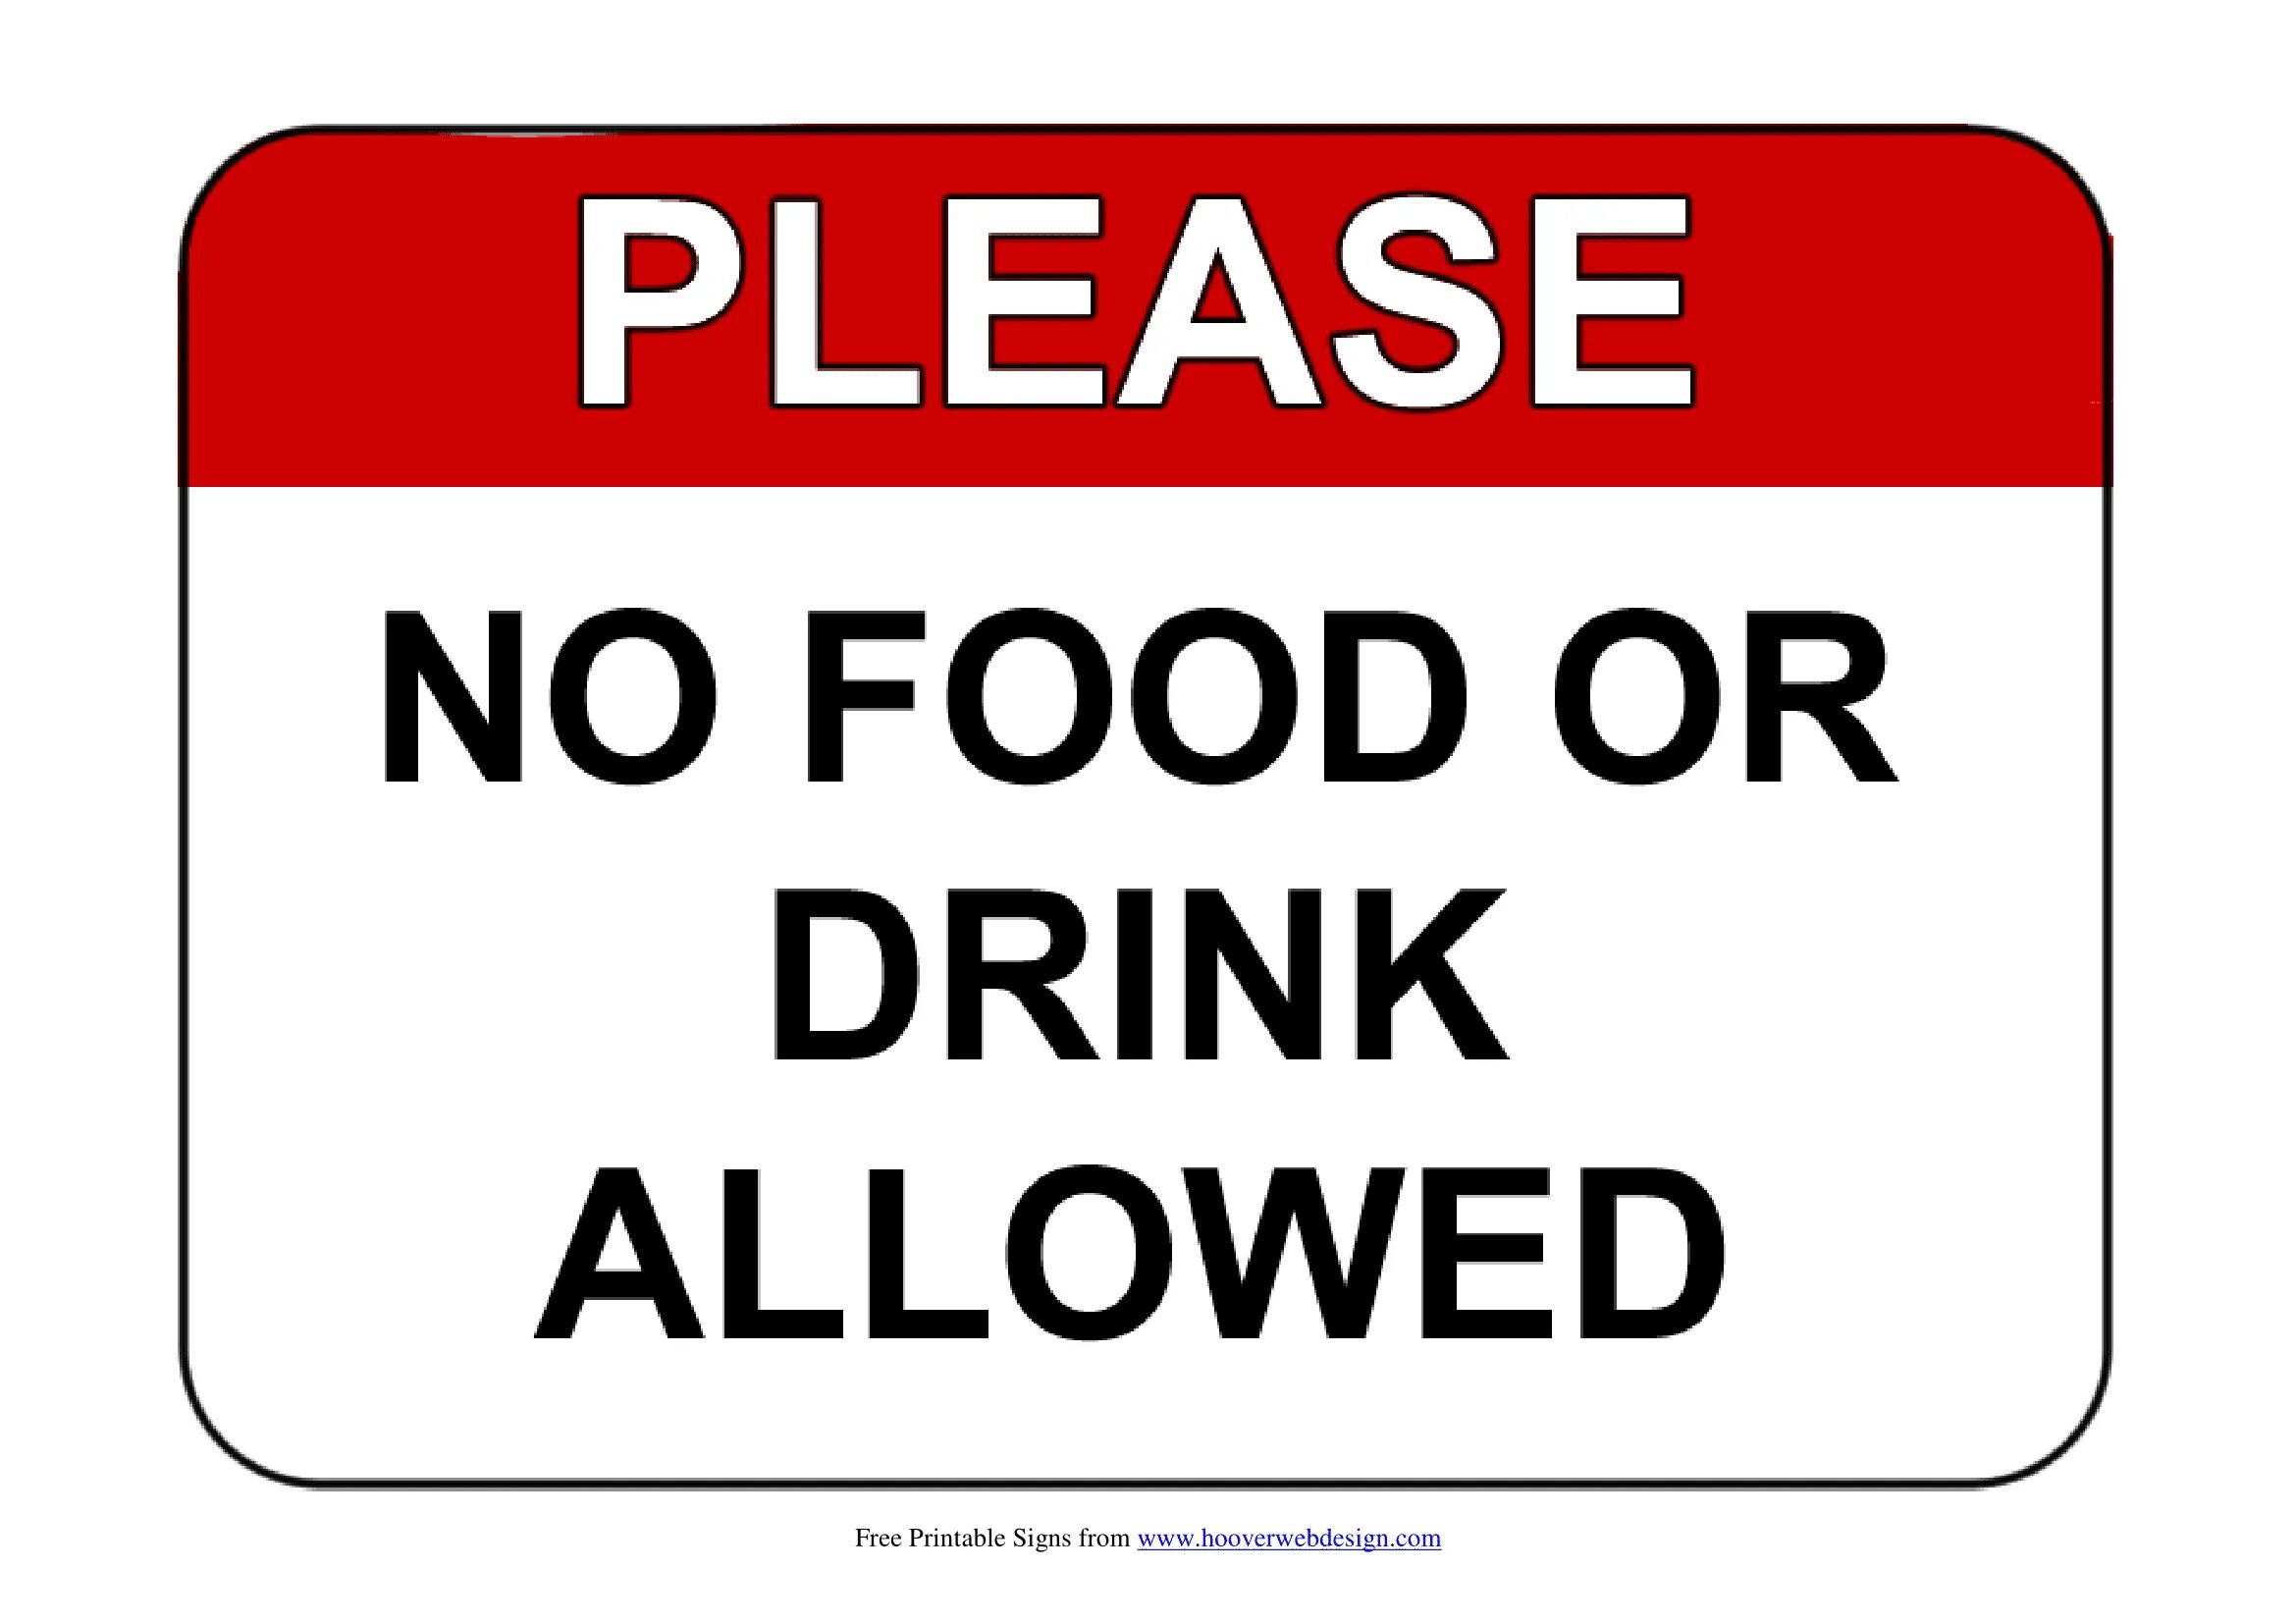 Additional property is not allowed. No food or Drink. Food sign. Not allowed. No food or Drink in this area.